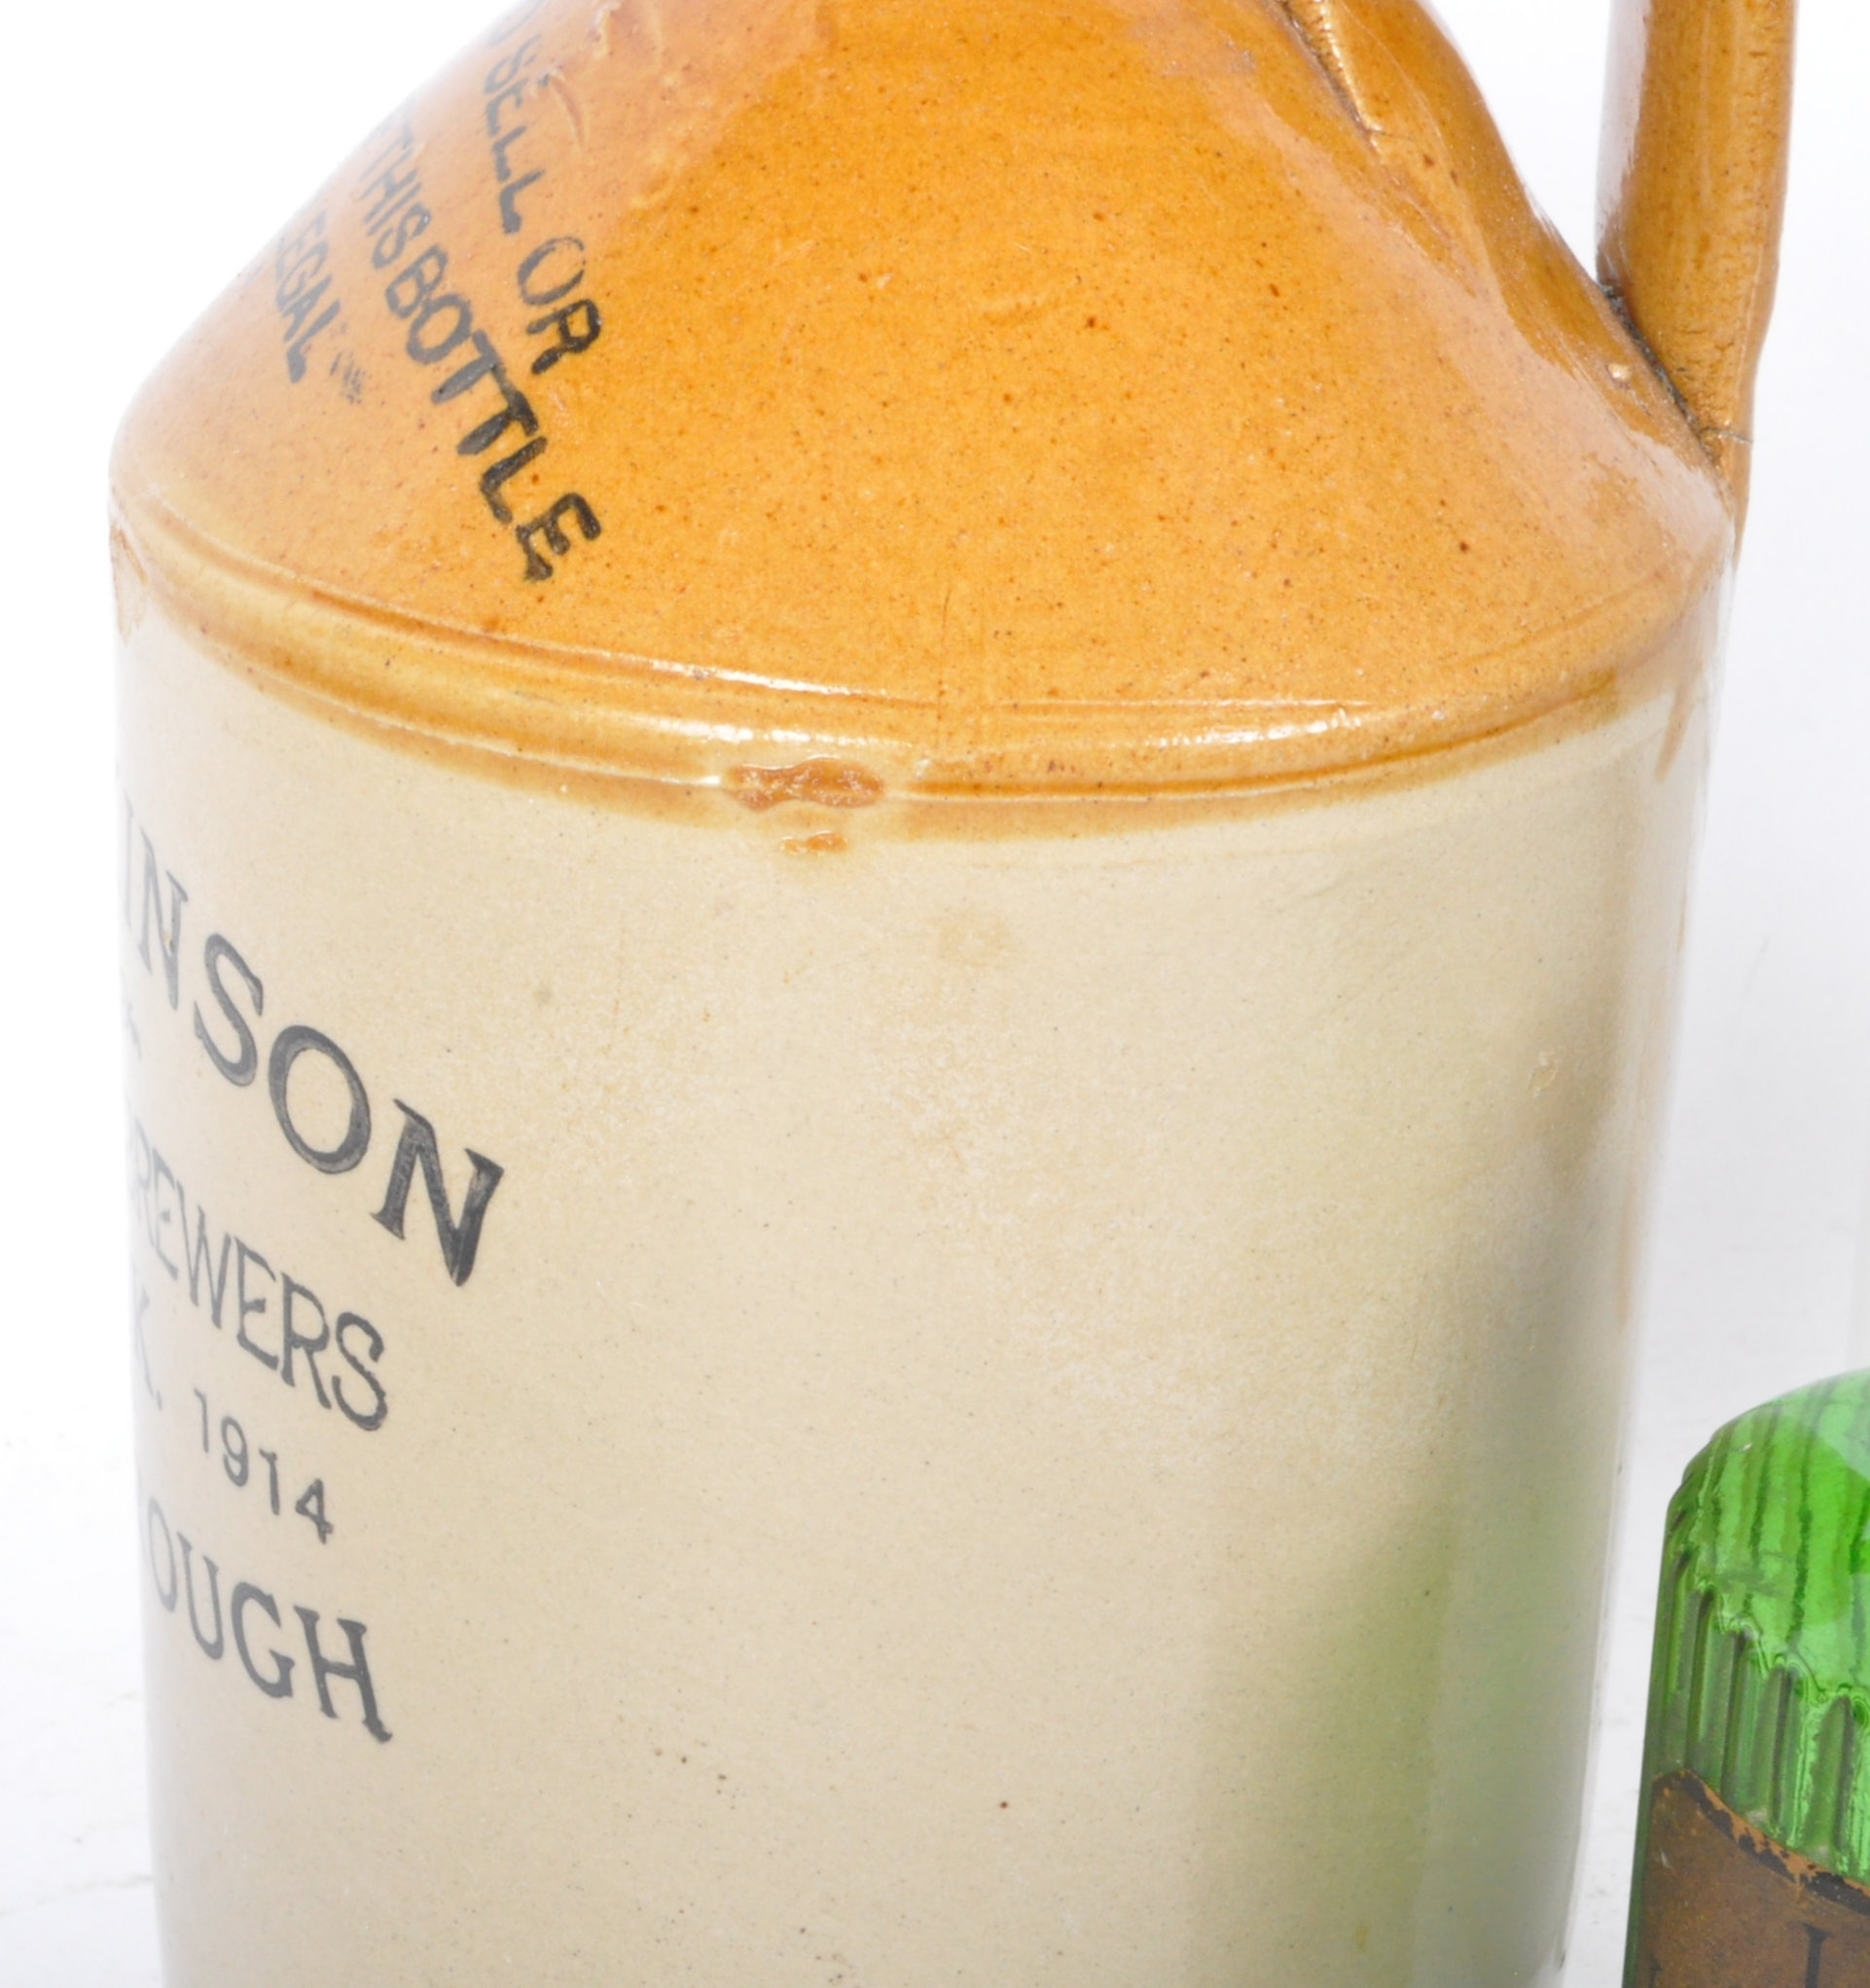 COLLECTION OF EARLY 20TH CENTURY PHARMACY GLASS BOTTLES - Image 2 of 5